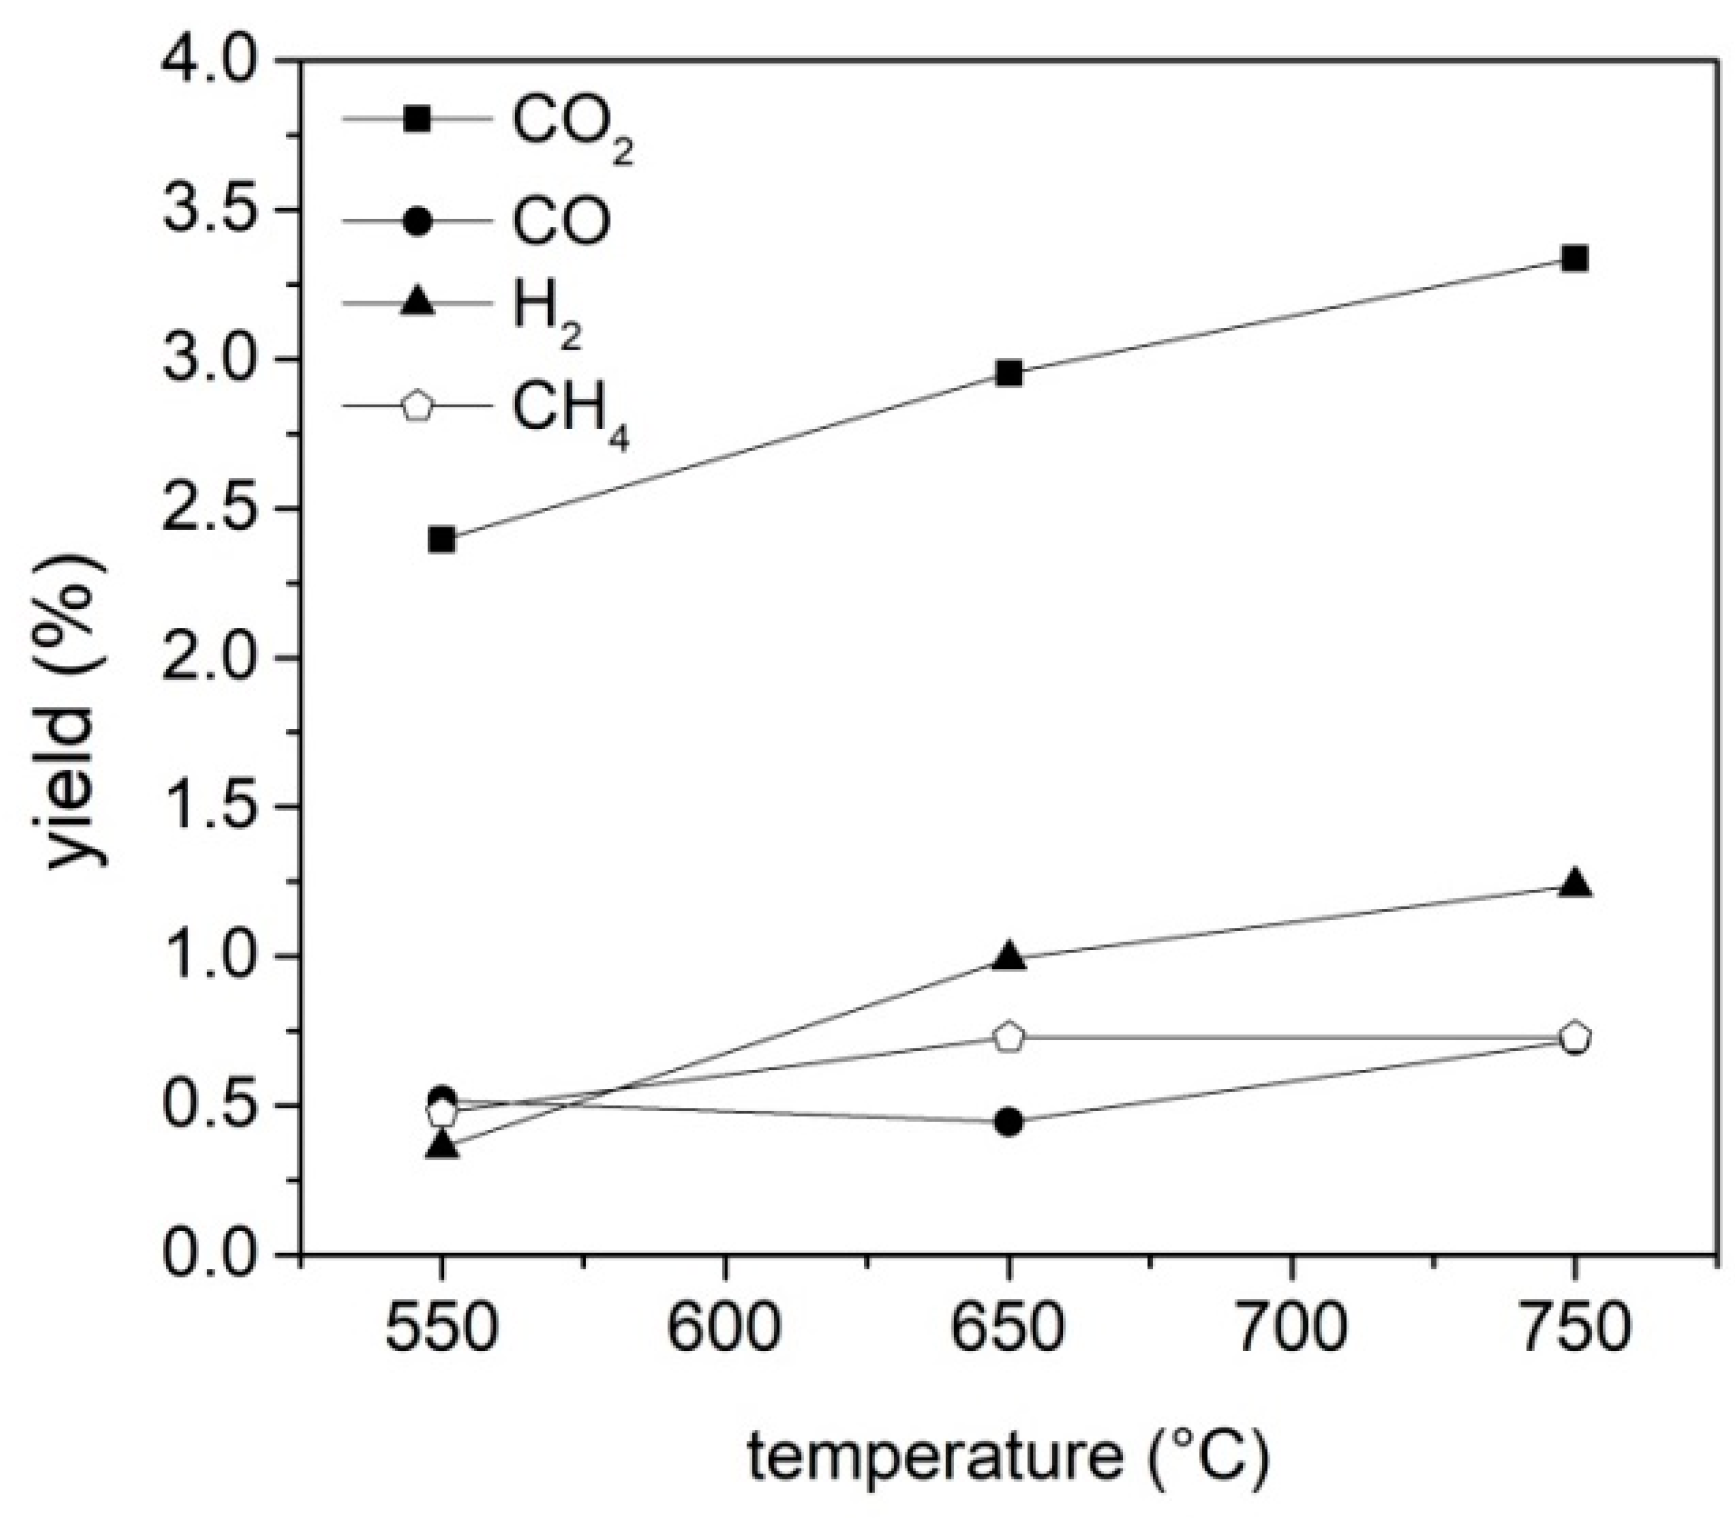 Evolution of pyrolysis and gasification as waste to energy tools for low  carbon economy - Porshnov - 2022 - WIREs Energy and Environment - Wiley  Online Library